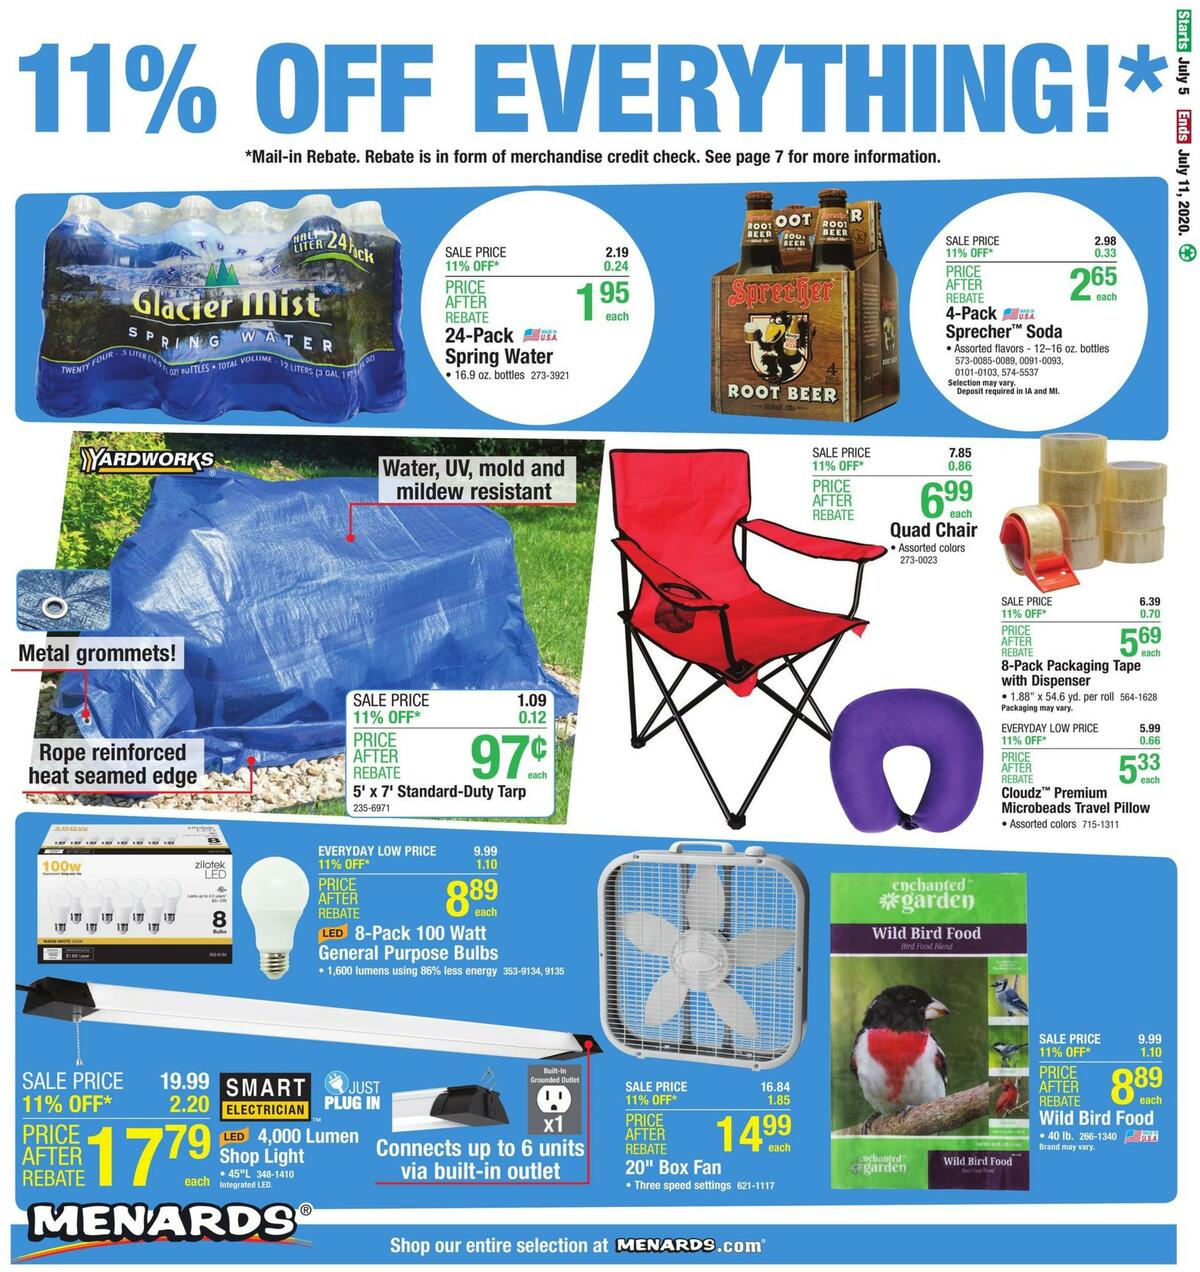 Menards Weekly Ads & Special Buys for July 5 - Page 10